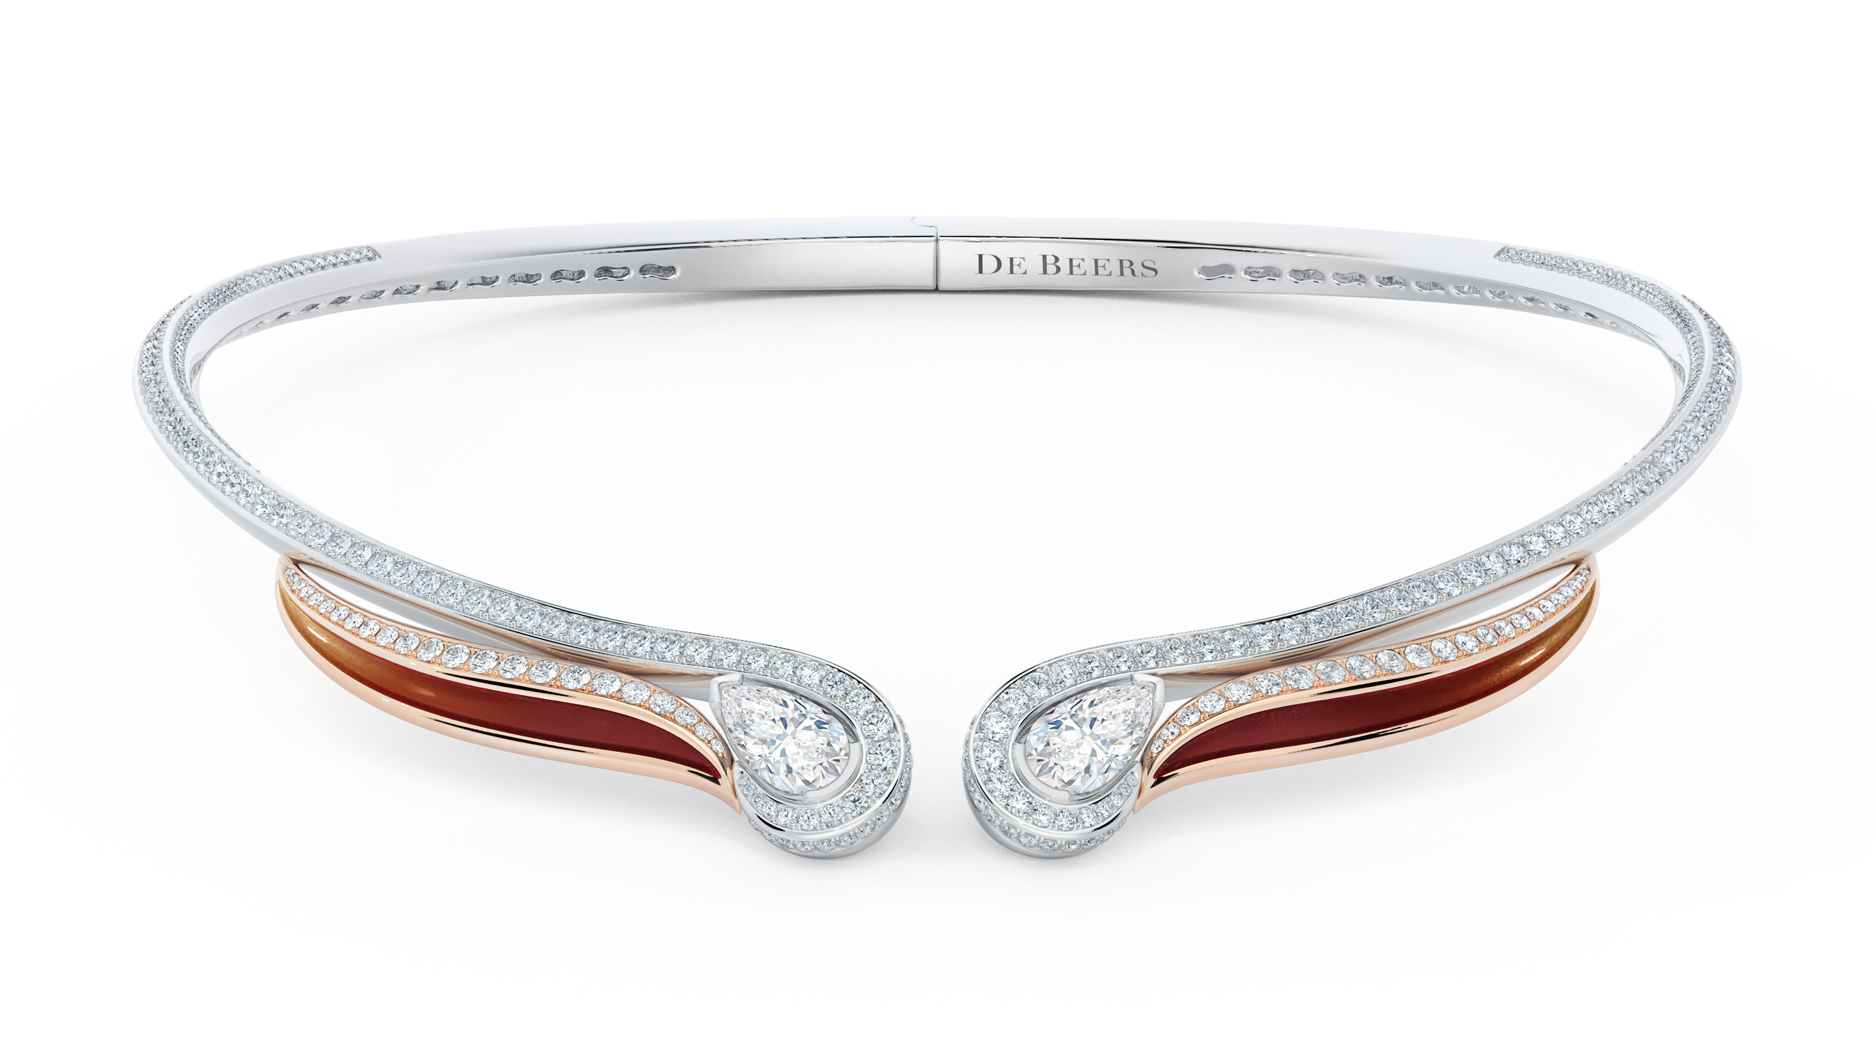 De Beers's Latest High-Jewelry Collection Combines Rough and Polished  Diamonds - Galerie